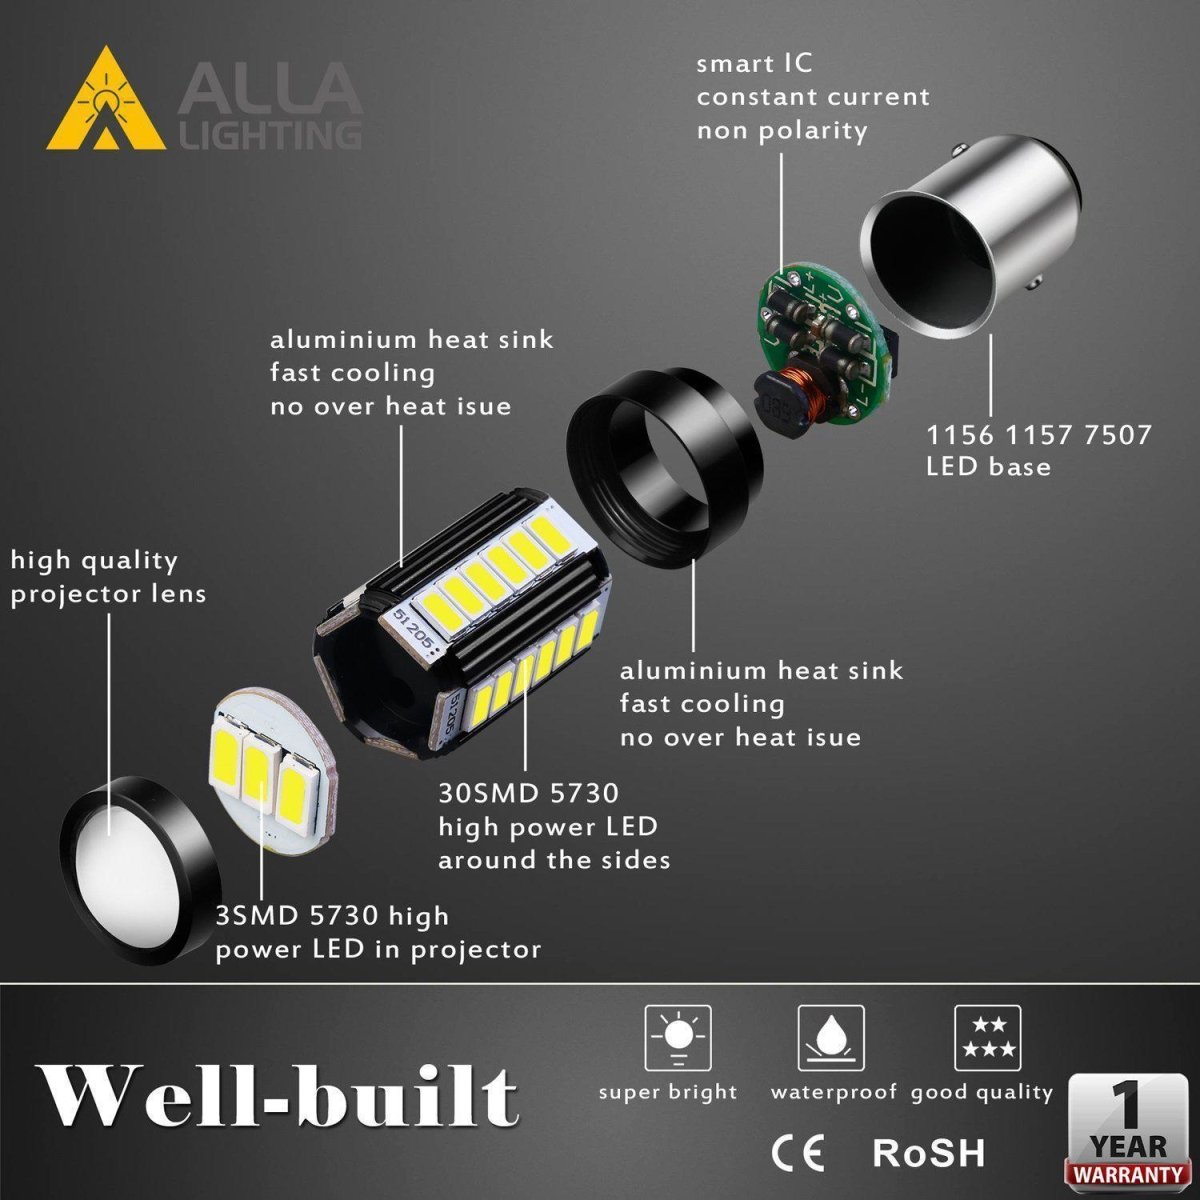 BA15D 1004 1142 LED Lights Bulbs for Boat, Cars, Trailers, Campers, RVs -Alla Lighting